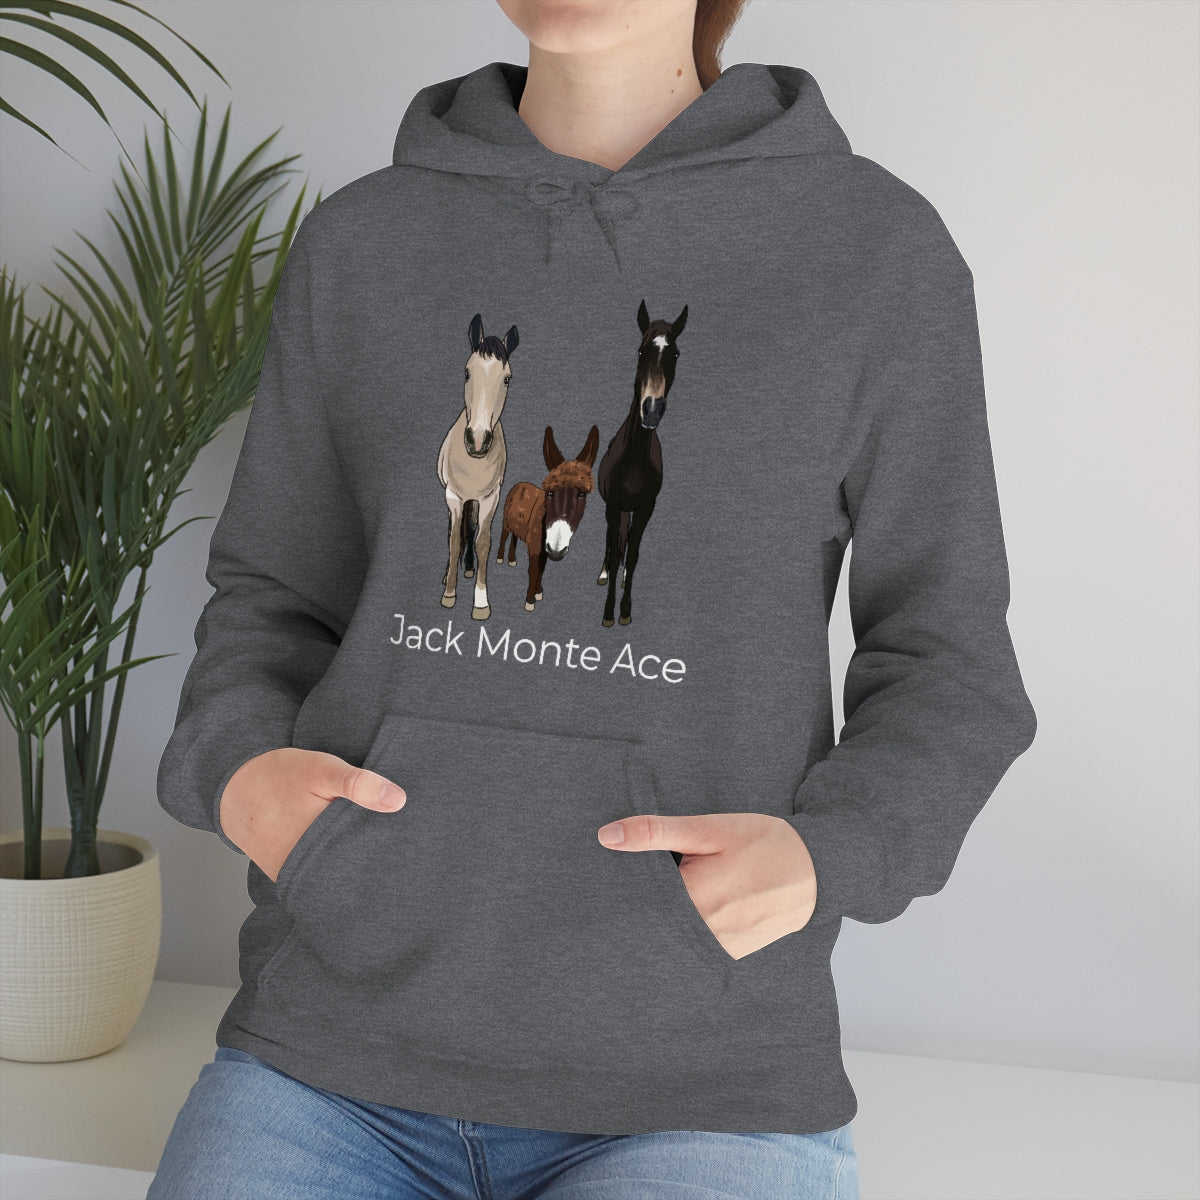 Monte the Singing Donkey and The Brudders Unisex Heavy Blend™ Hooded Sweatshirt (S-5XL)